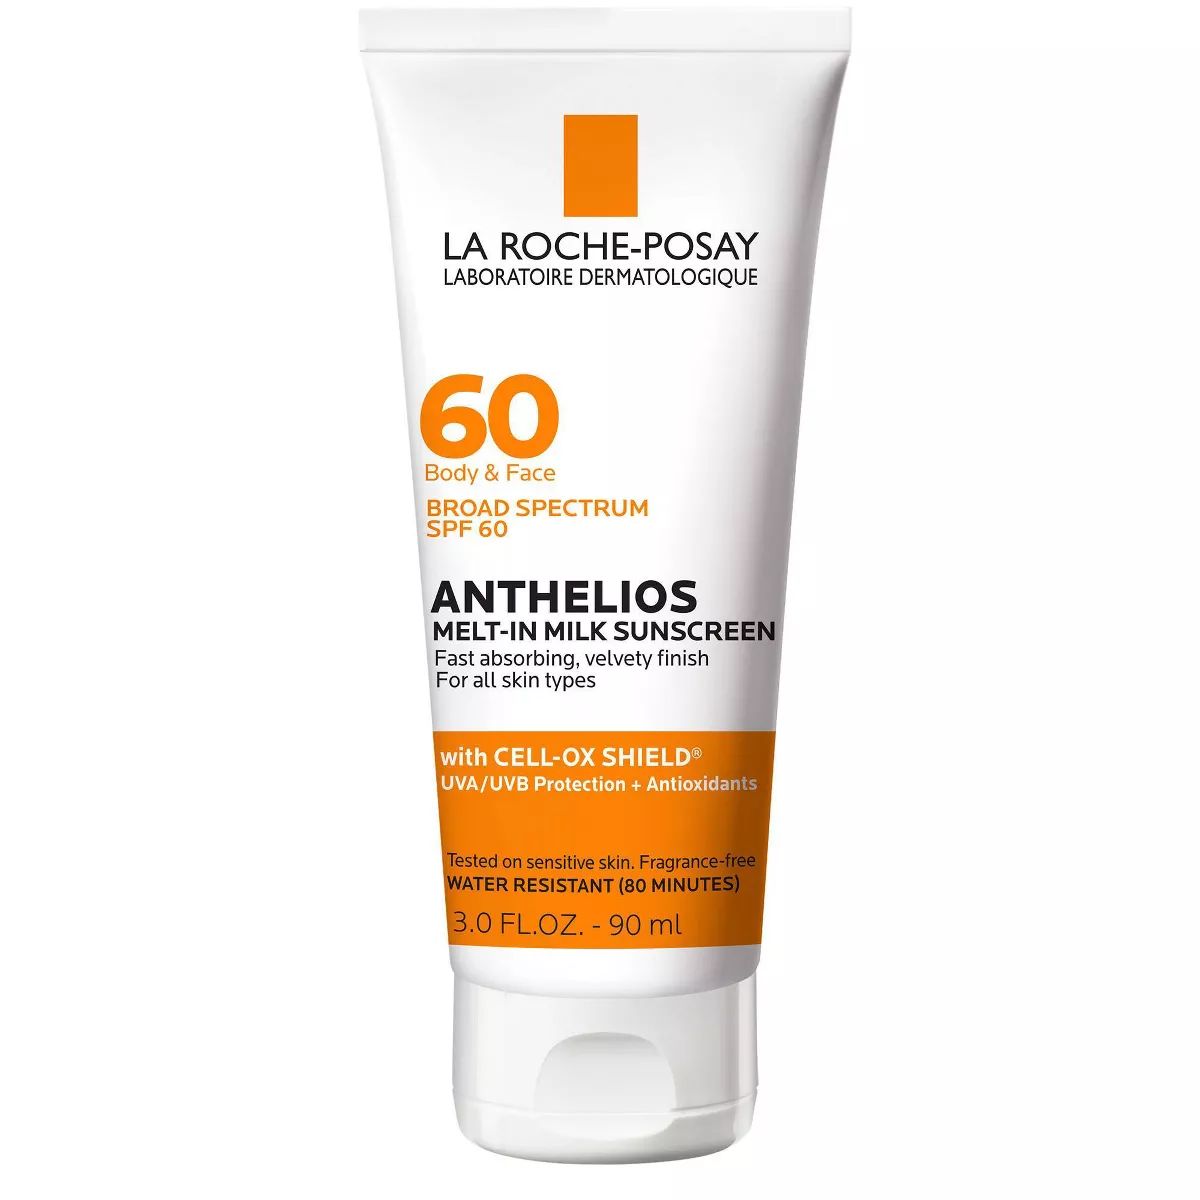 La Roche Posay Anthelios Sunscreen, Melt In Milk Lotion Face and Body Sunscreen - SPF 60 - 3oz | Target